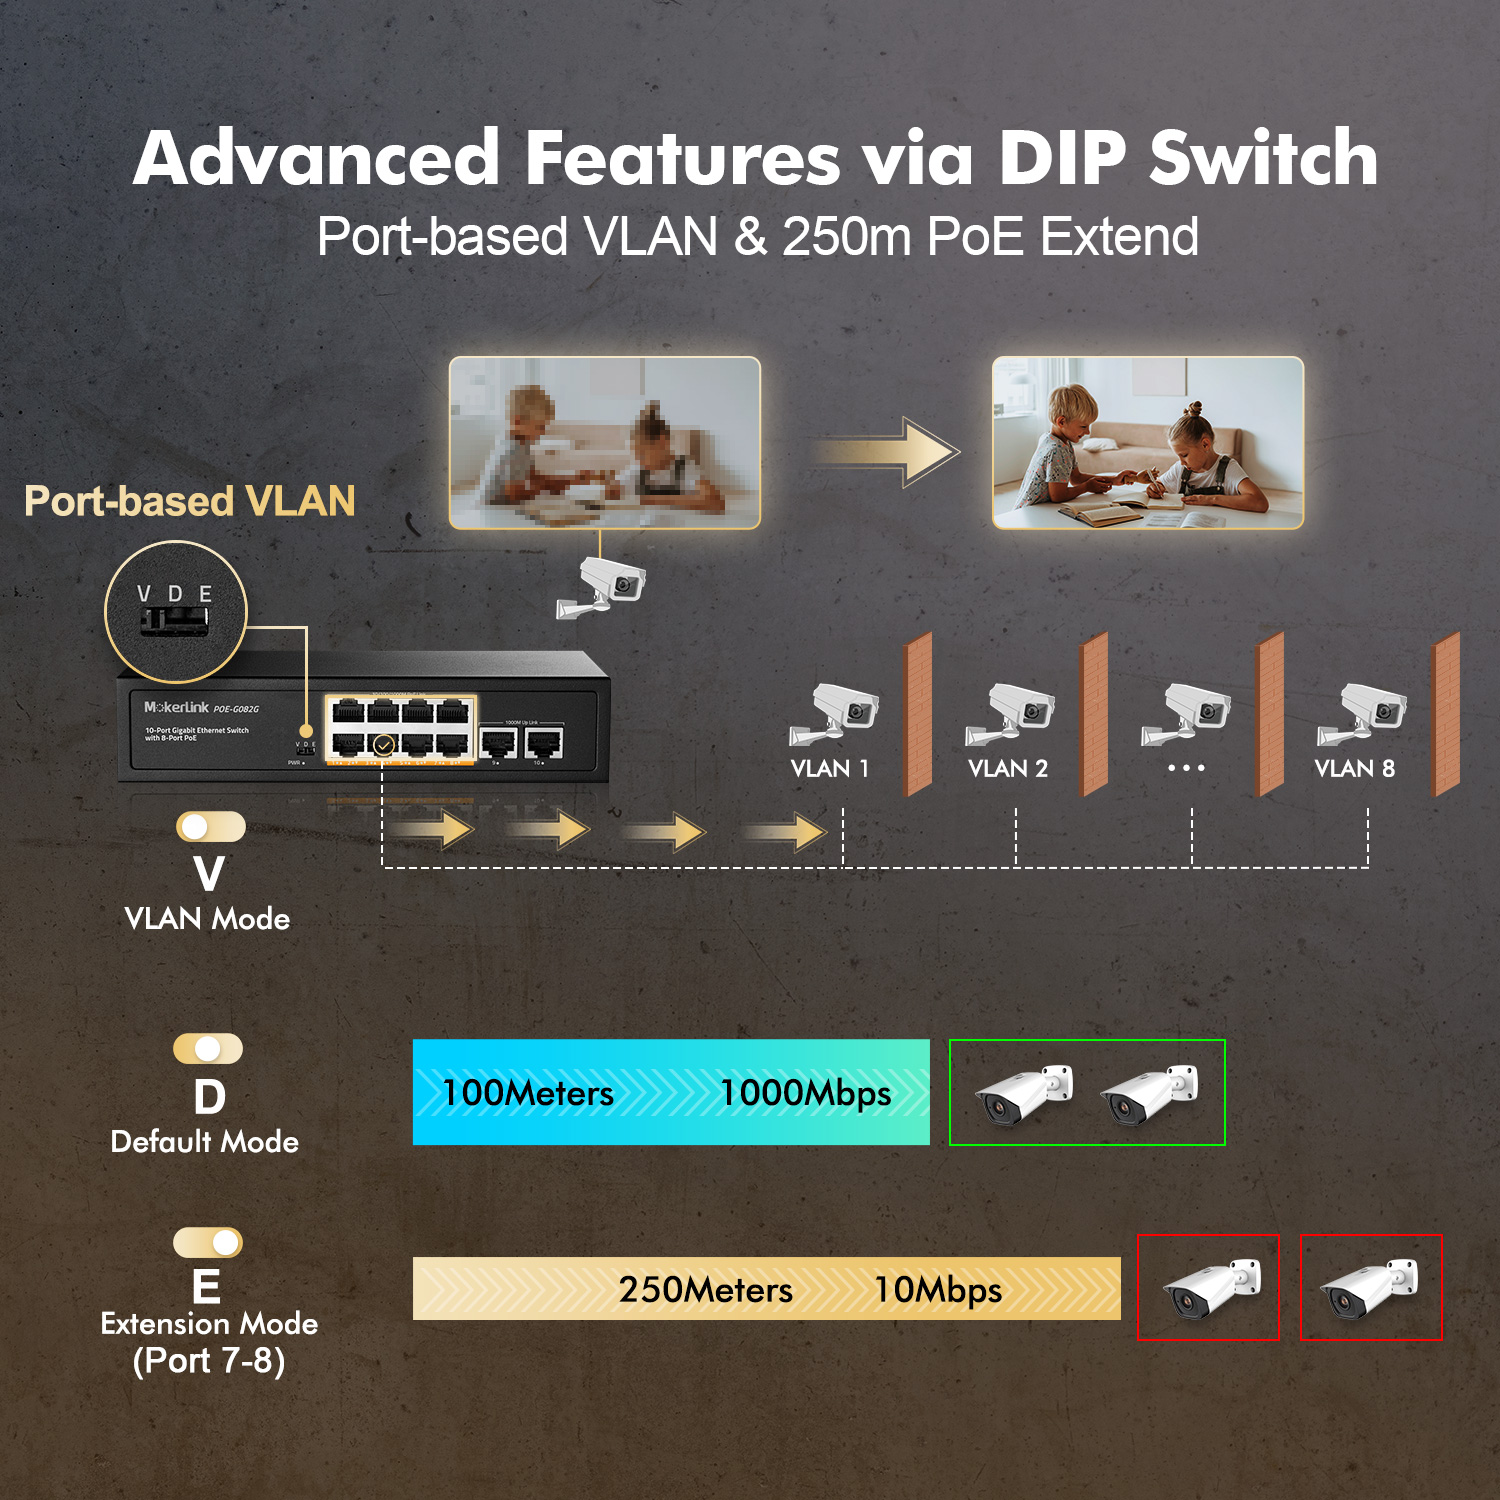 LINKOH Unmanaged Switch PoE with 8 Ports 10/100M and 2GE Uplink - LINKOH